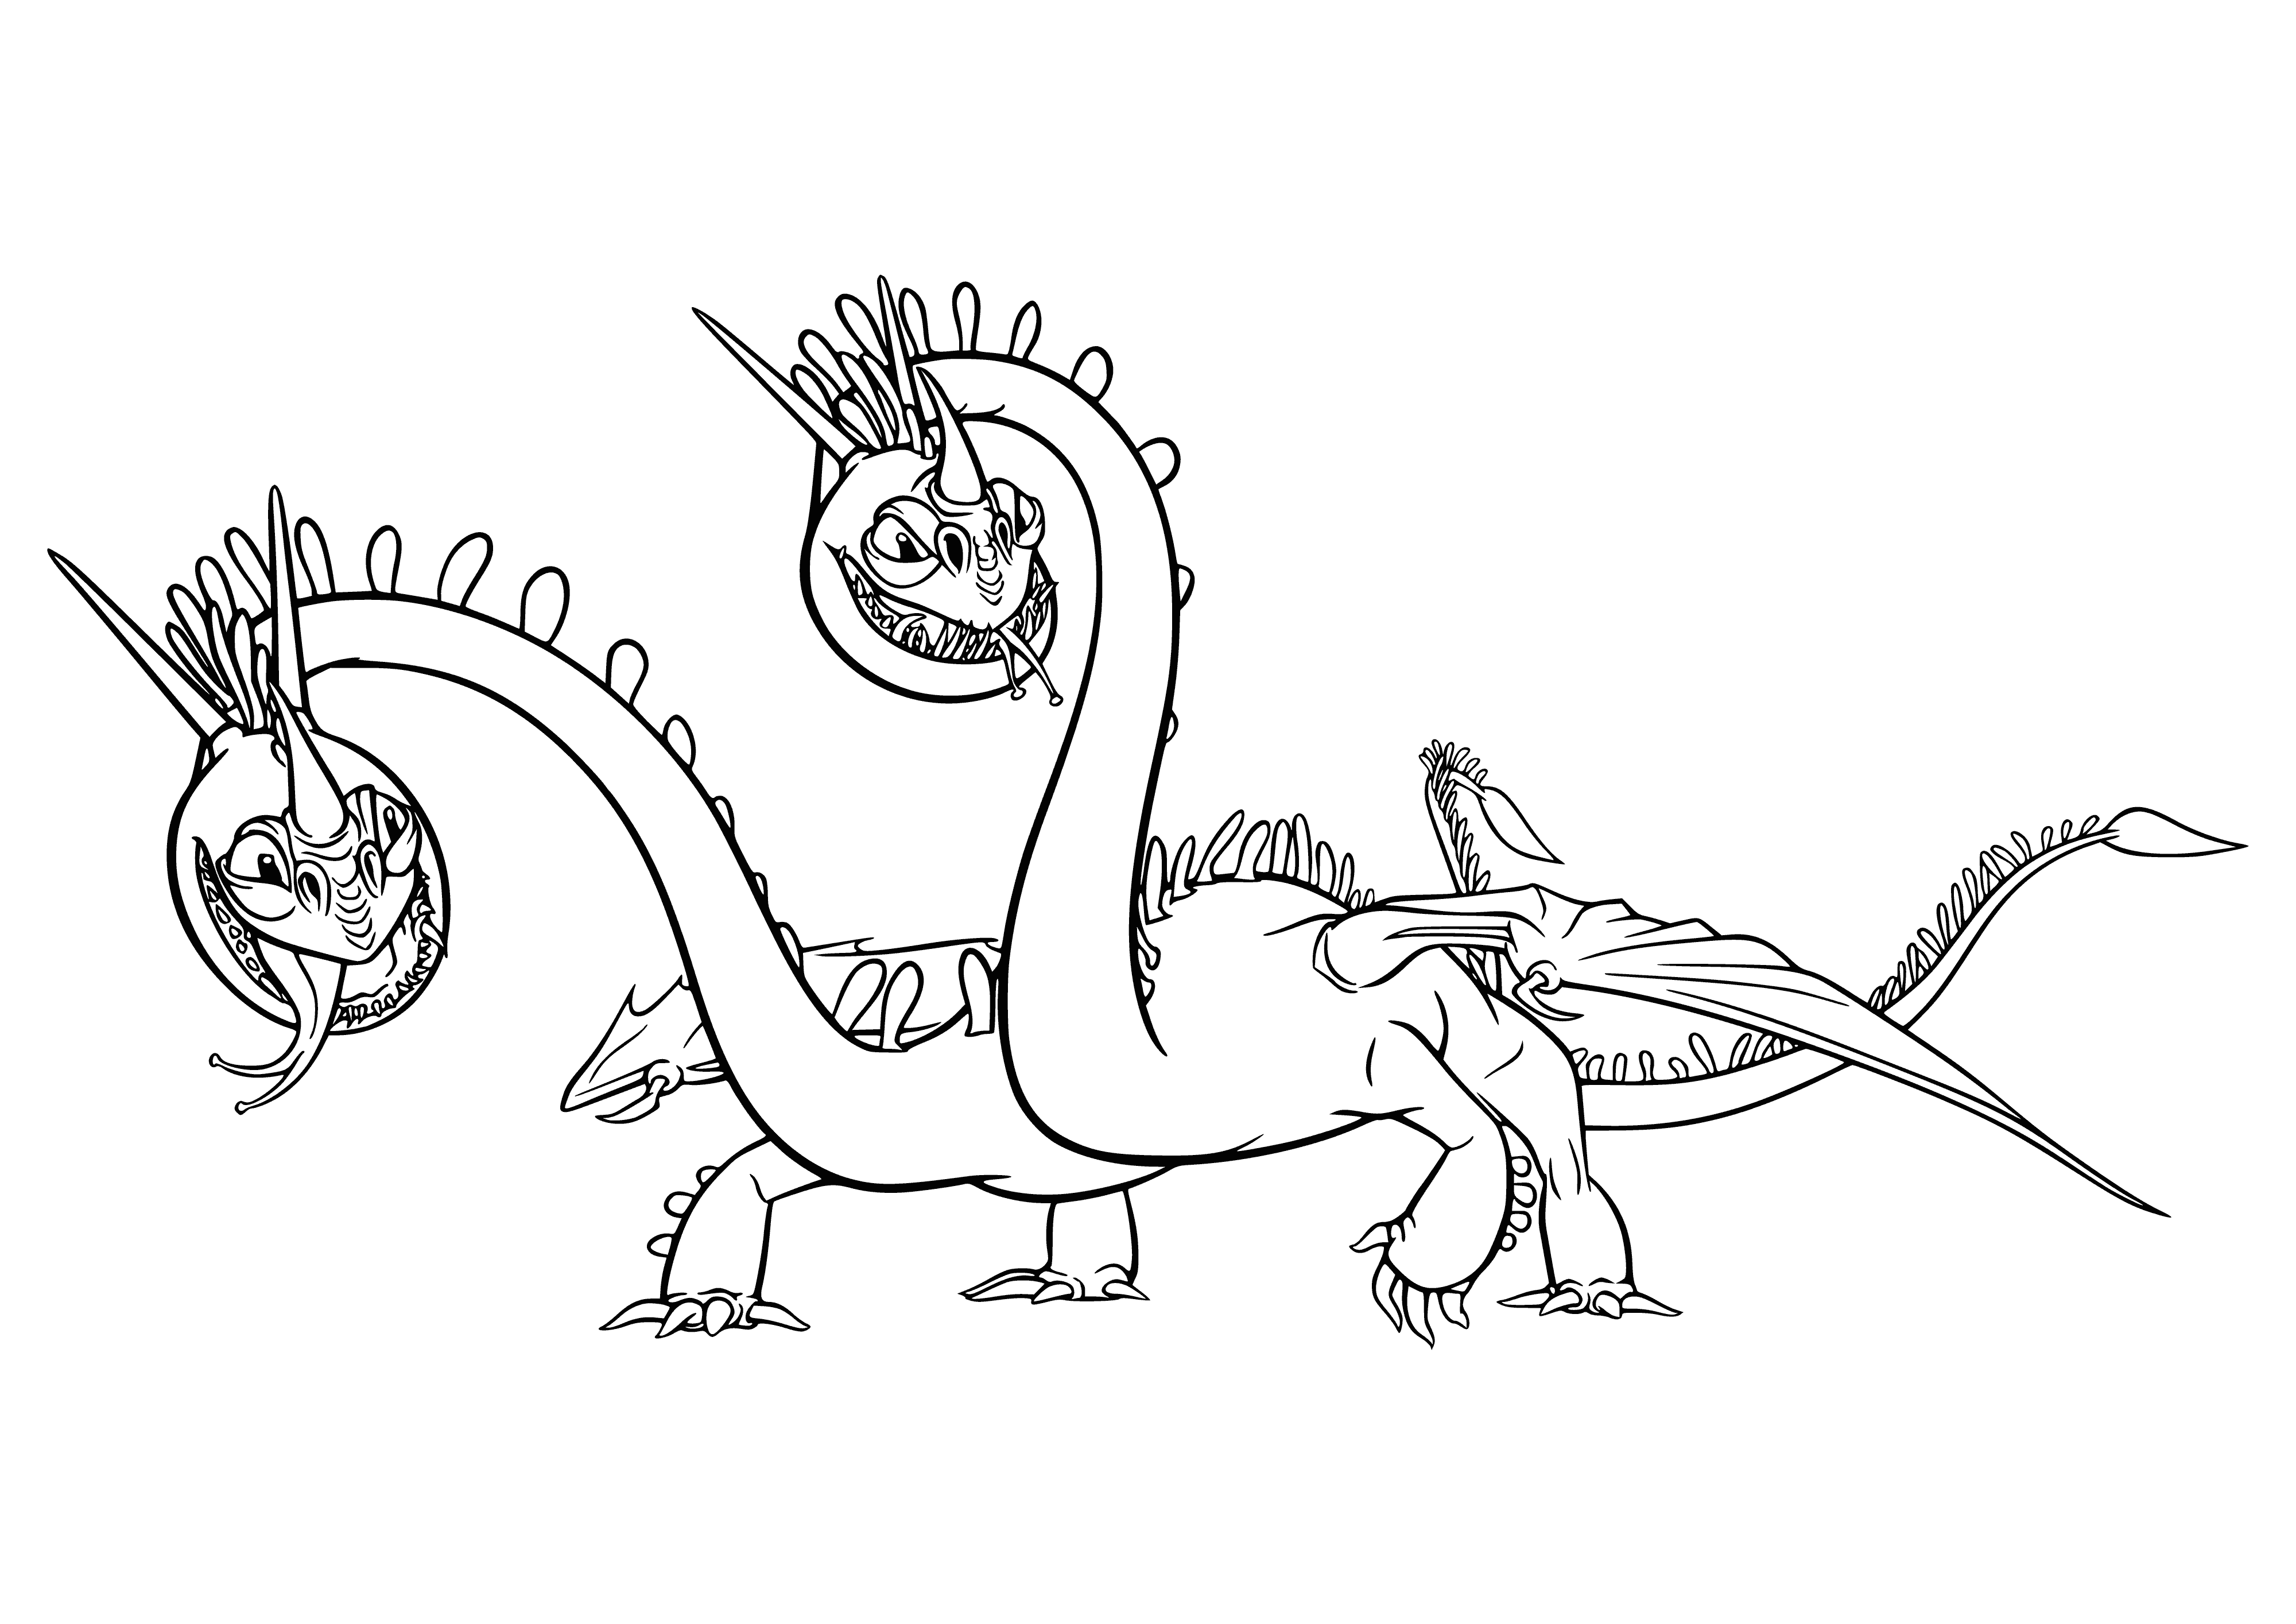 Dragon Pinchheads coloring page